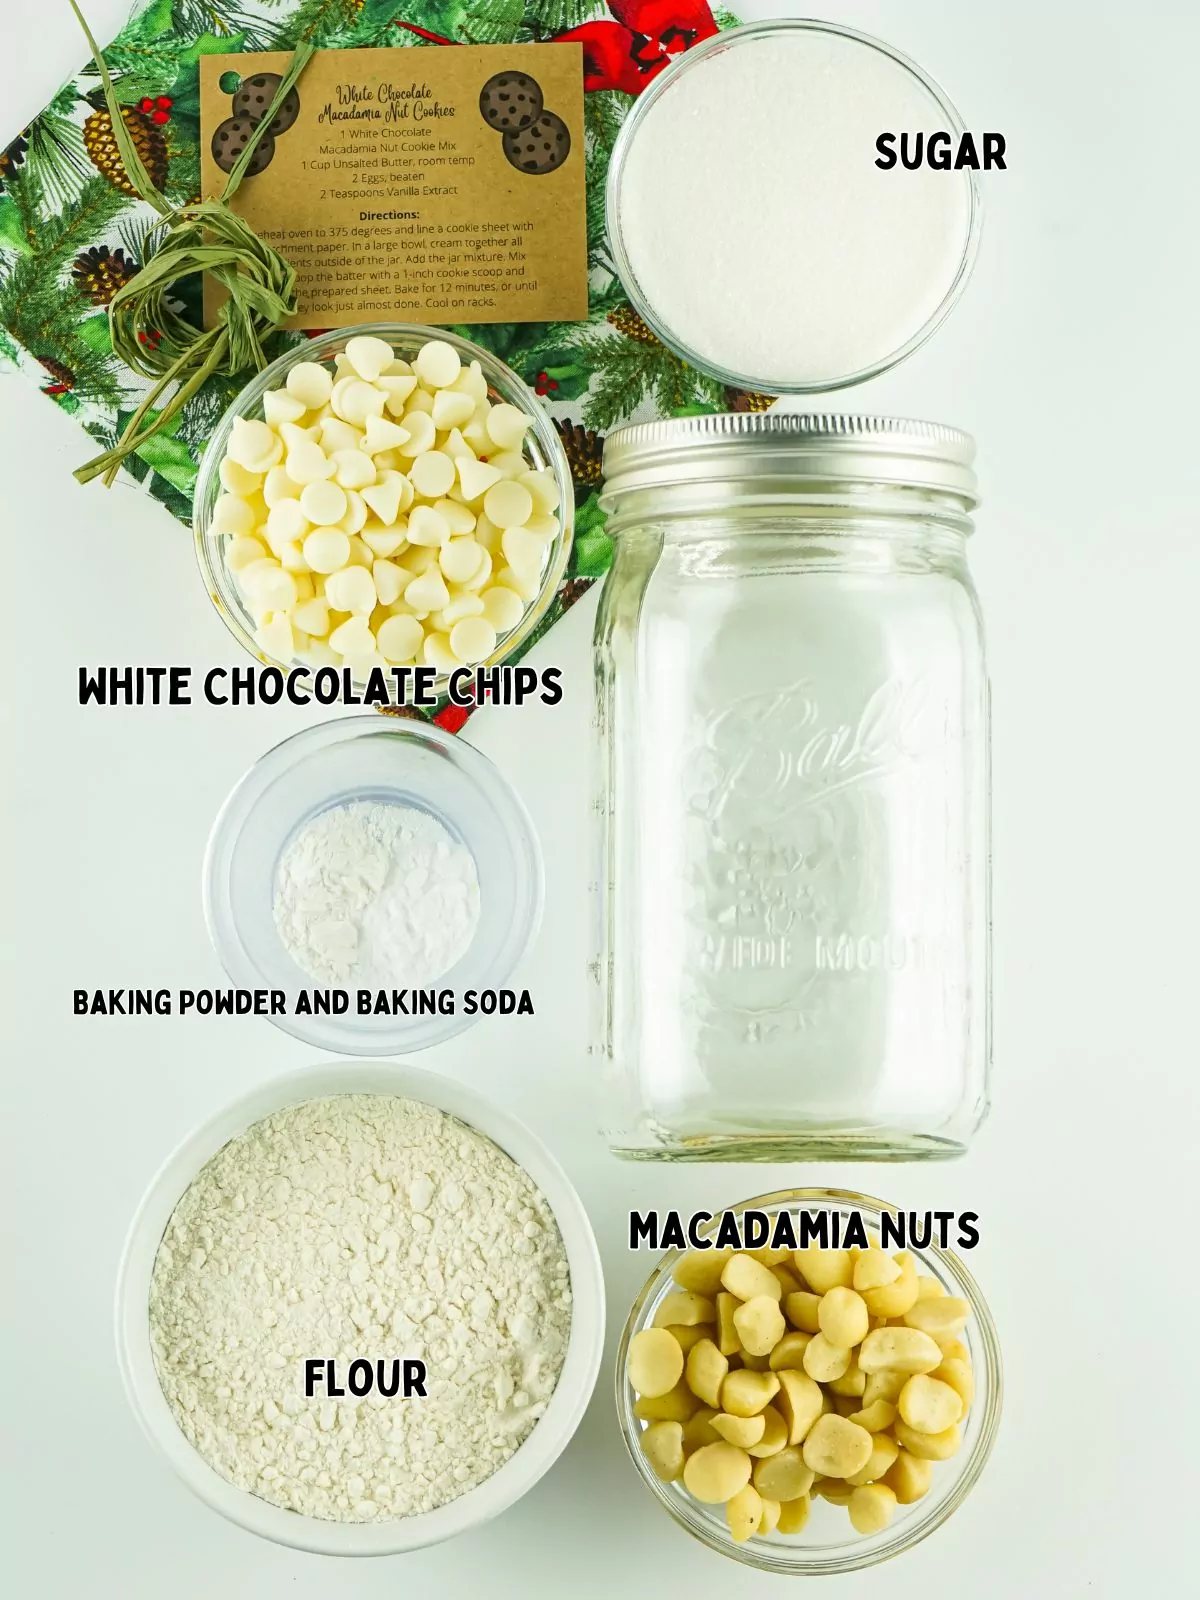 Ingredients for mason jar cookies with macadamia nuts.